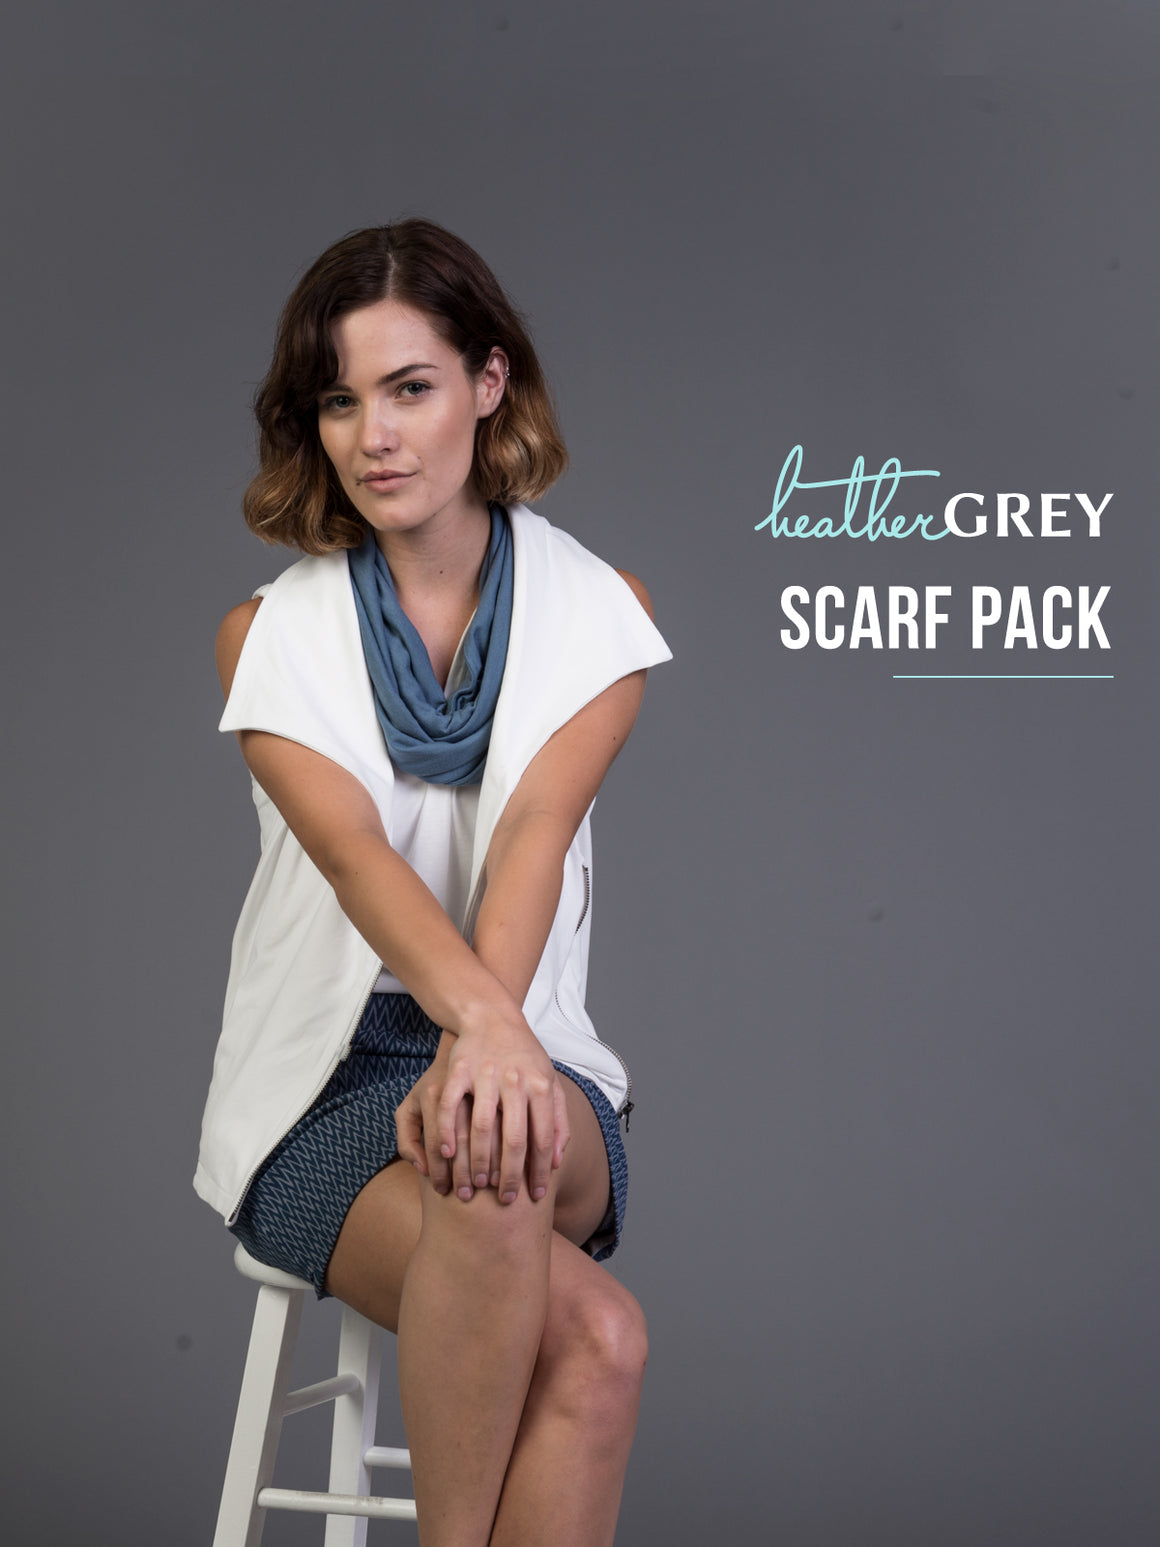 Heather Grey Mystery Scarf Pack